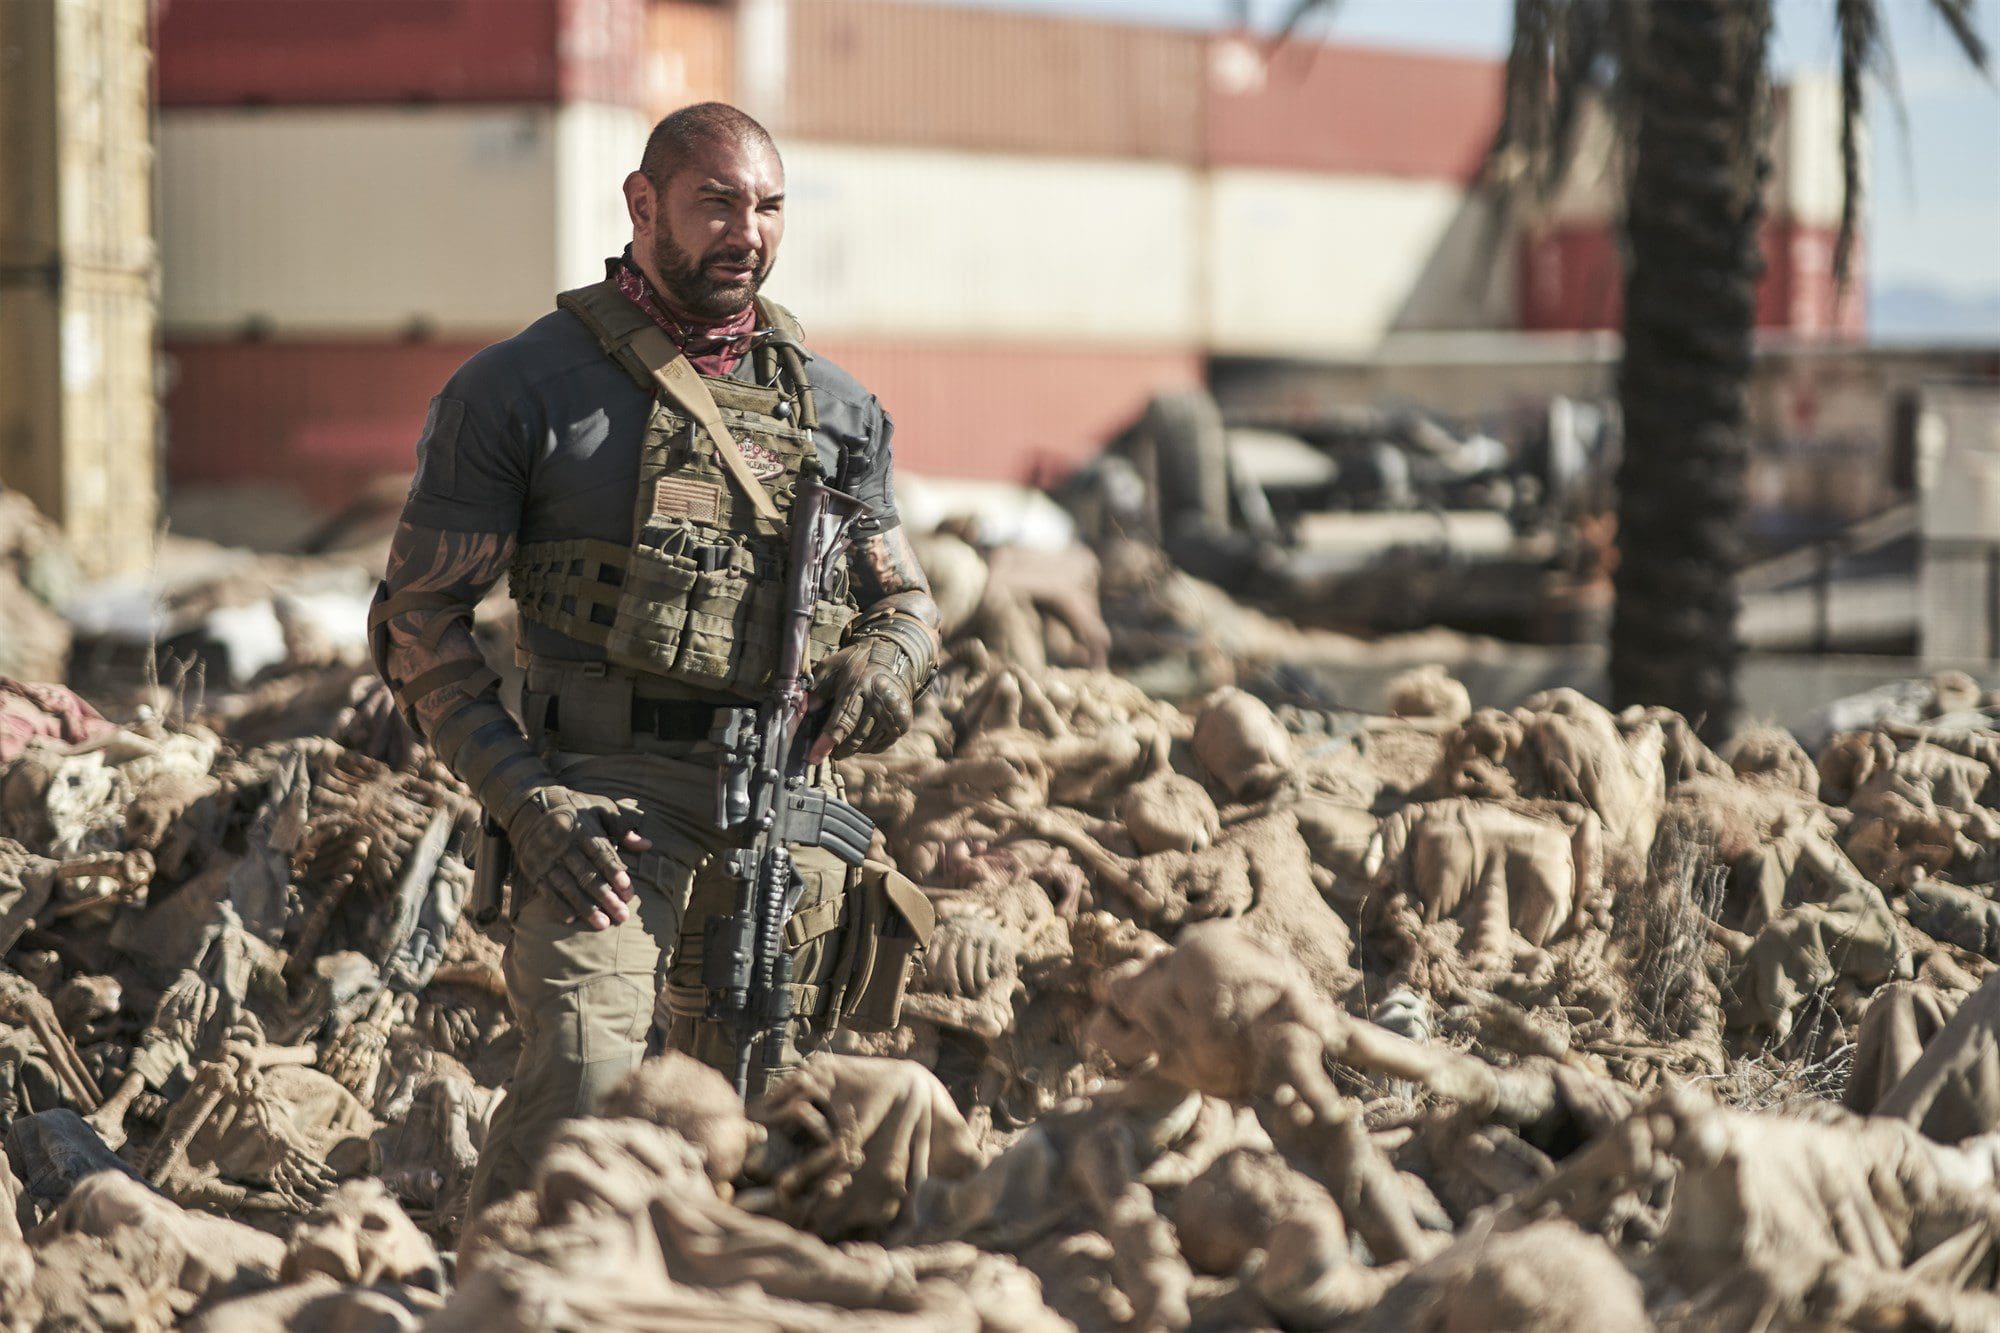 ARMY OF THE DEAD (Pictured) DAVE BAUTISTA as SCOTT WARD in ARMY OF THE DEAD. 